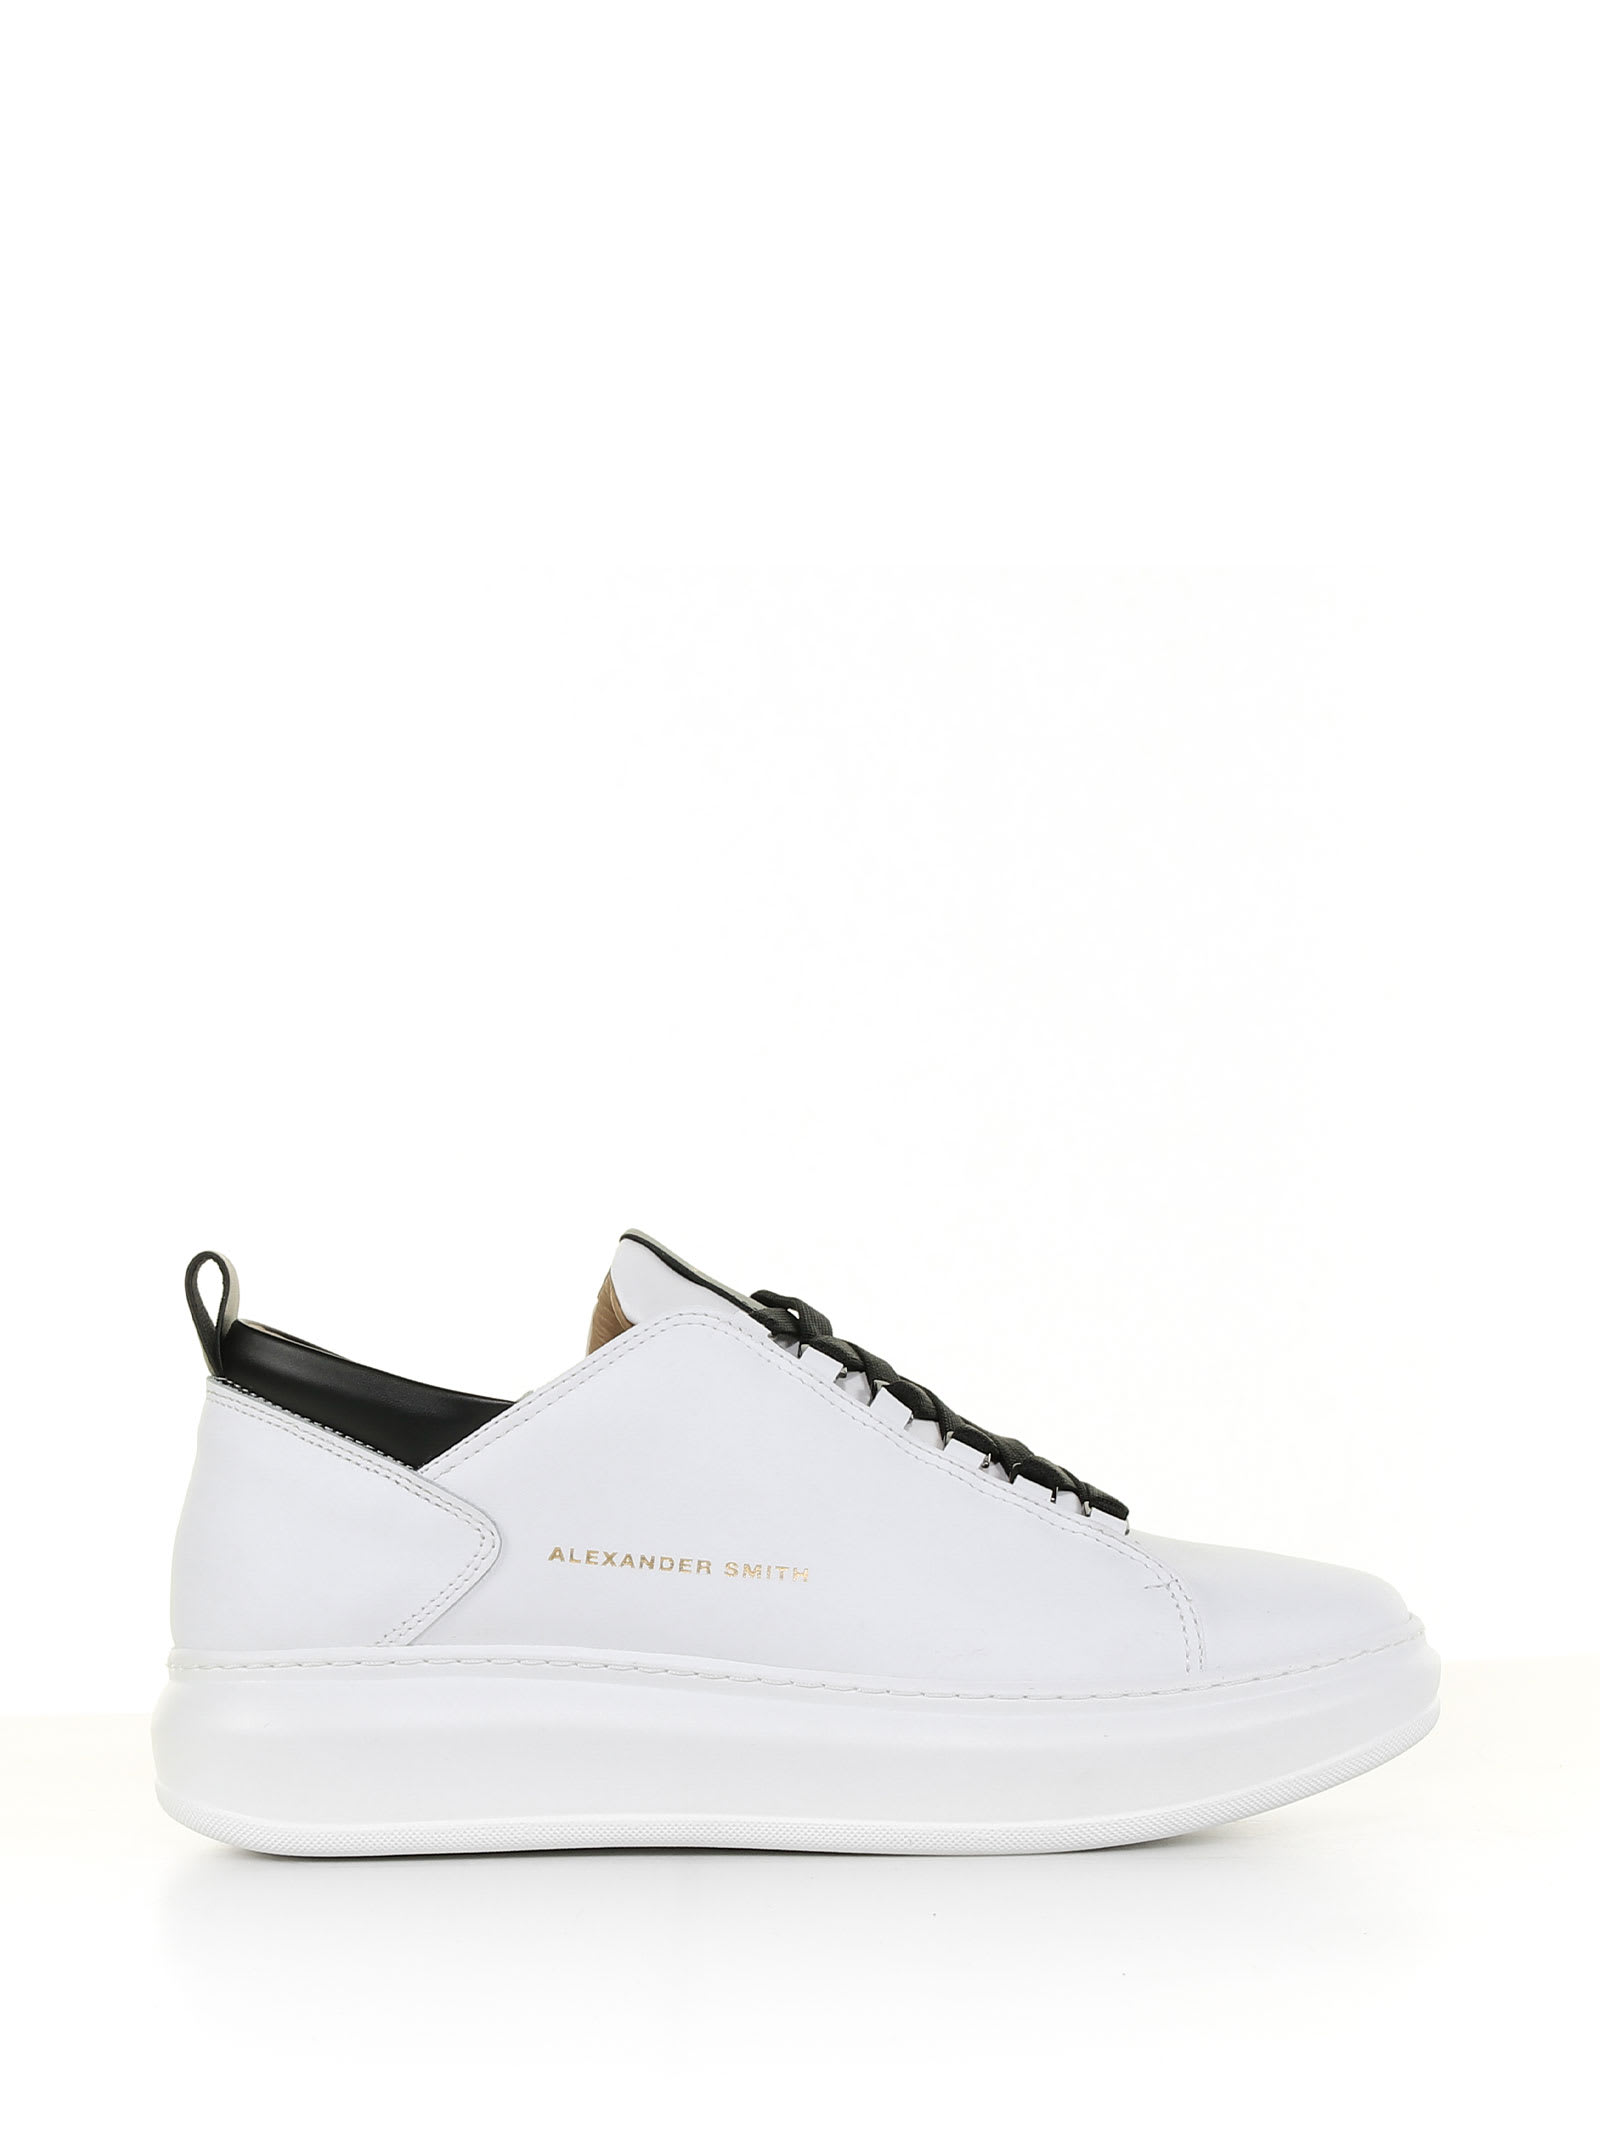 Alexander Smith London White Sneaker With Black Contrast